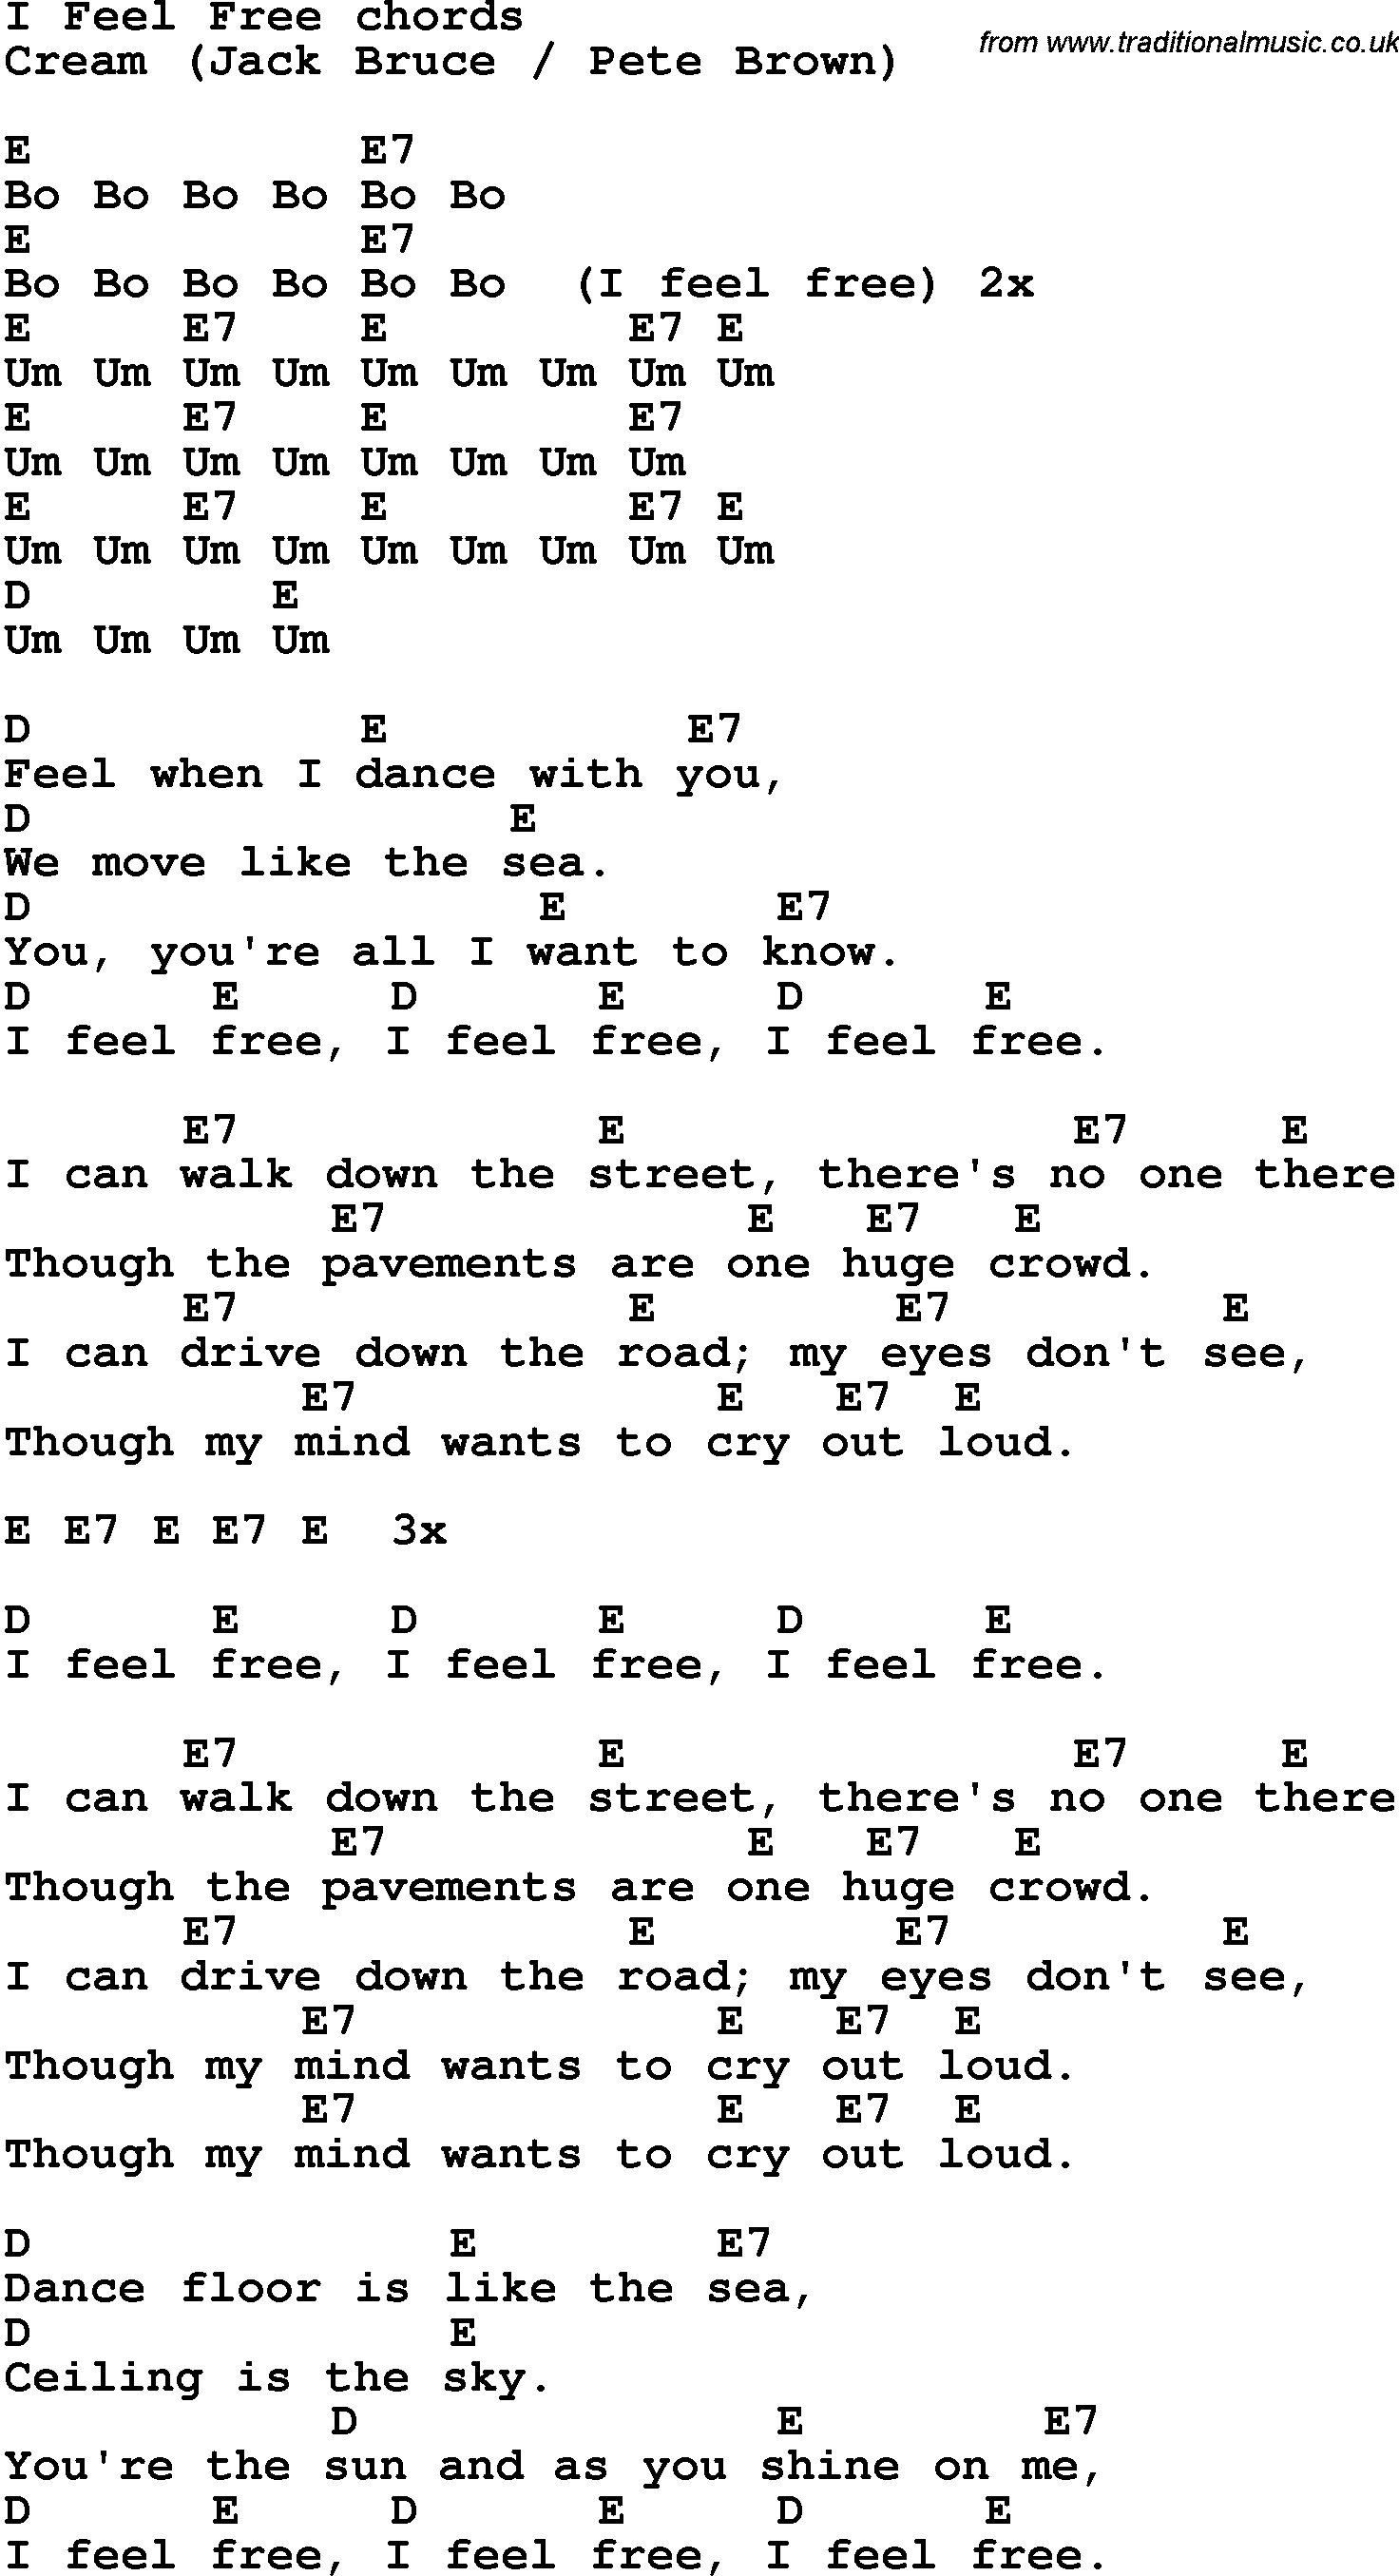 Song Lyrics with guitar chords for I Feel Free